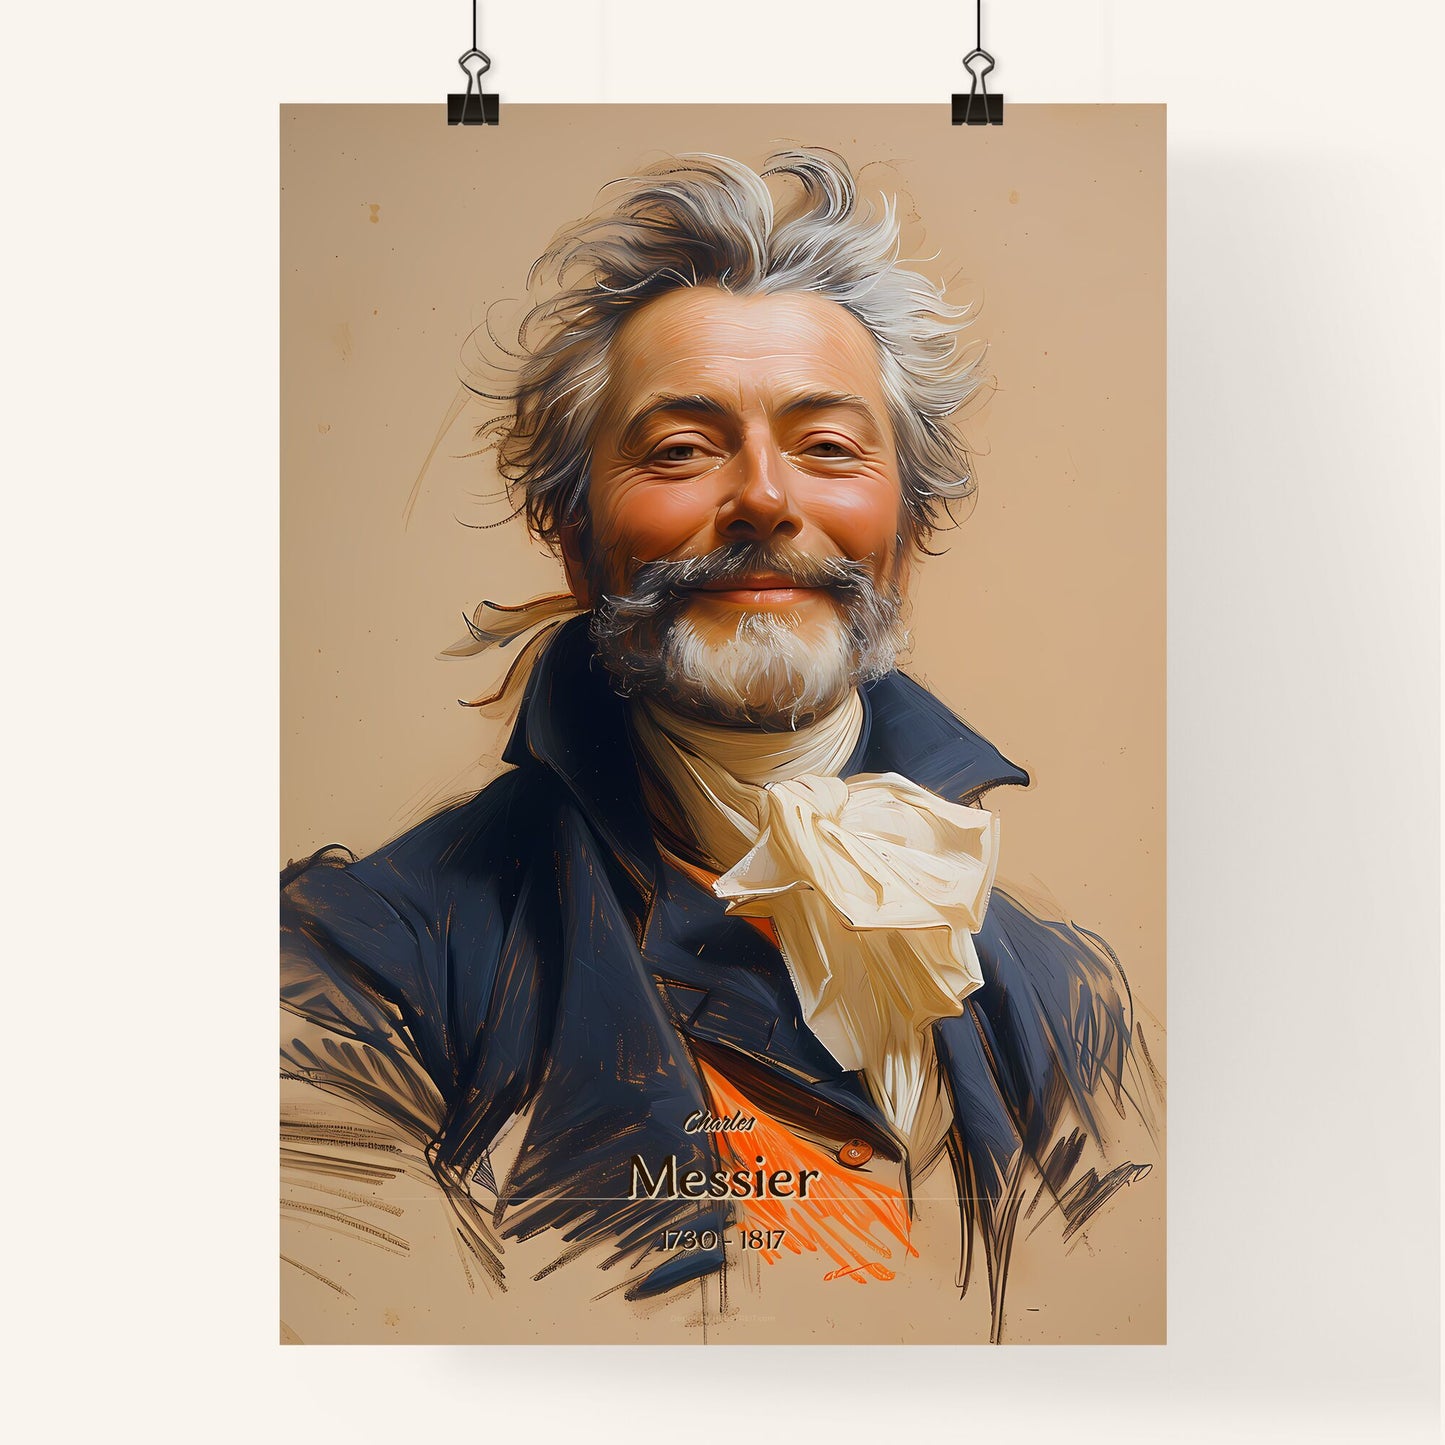 Charles, Messier, 1730 - 1817, A Poster of a man with a beard and mustache Default Title